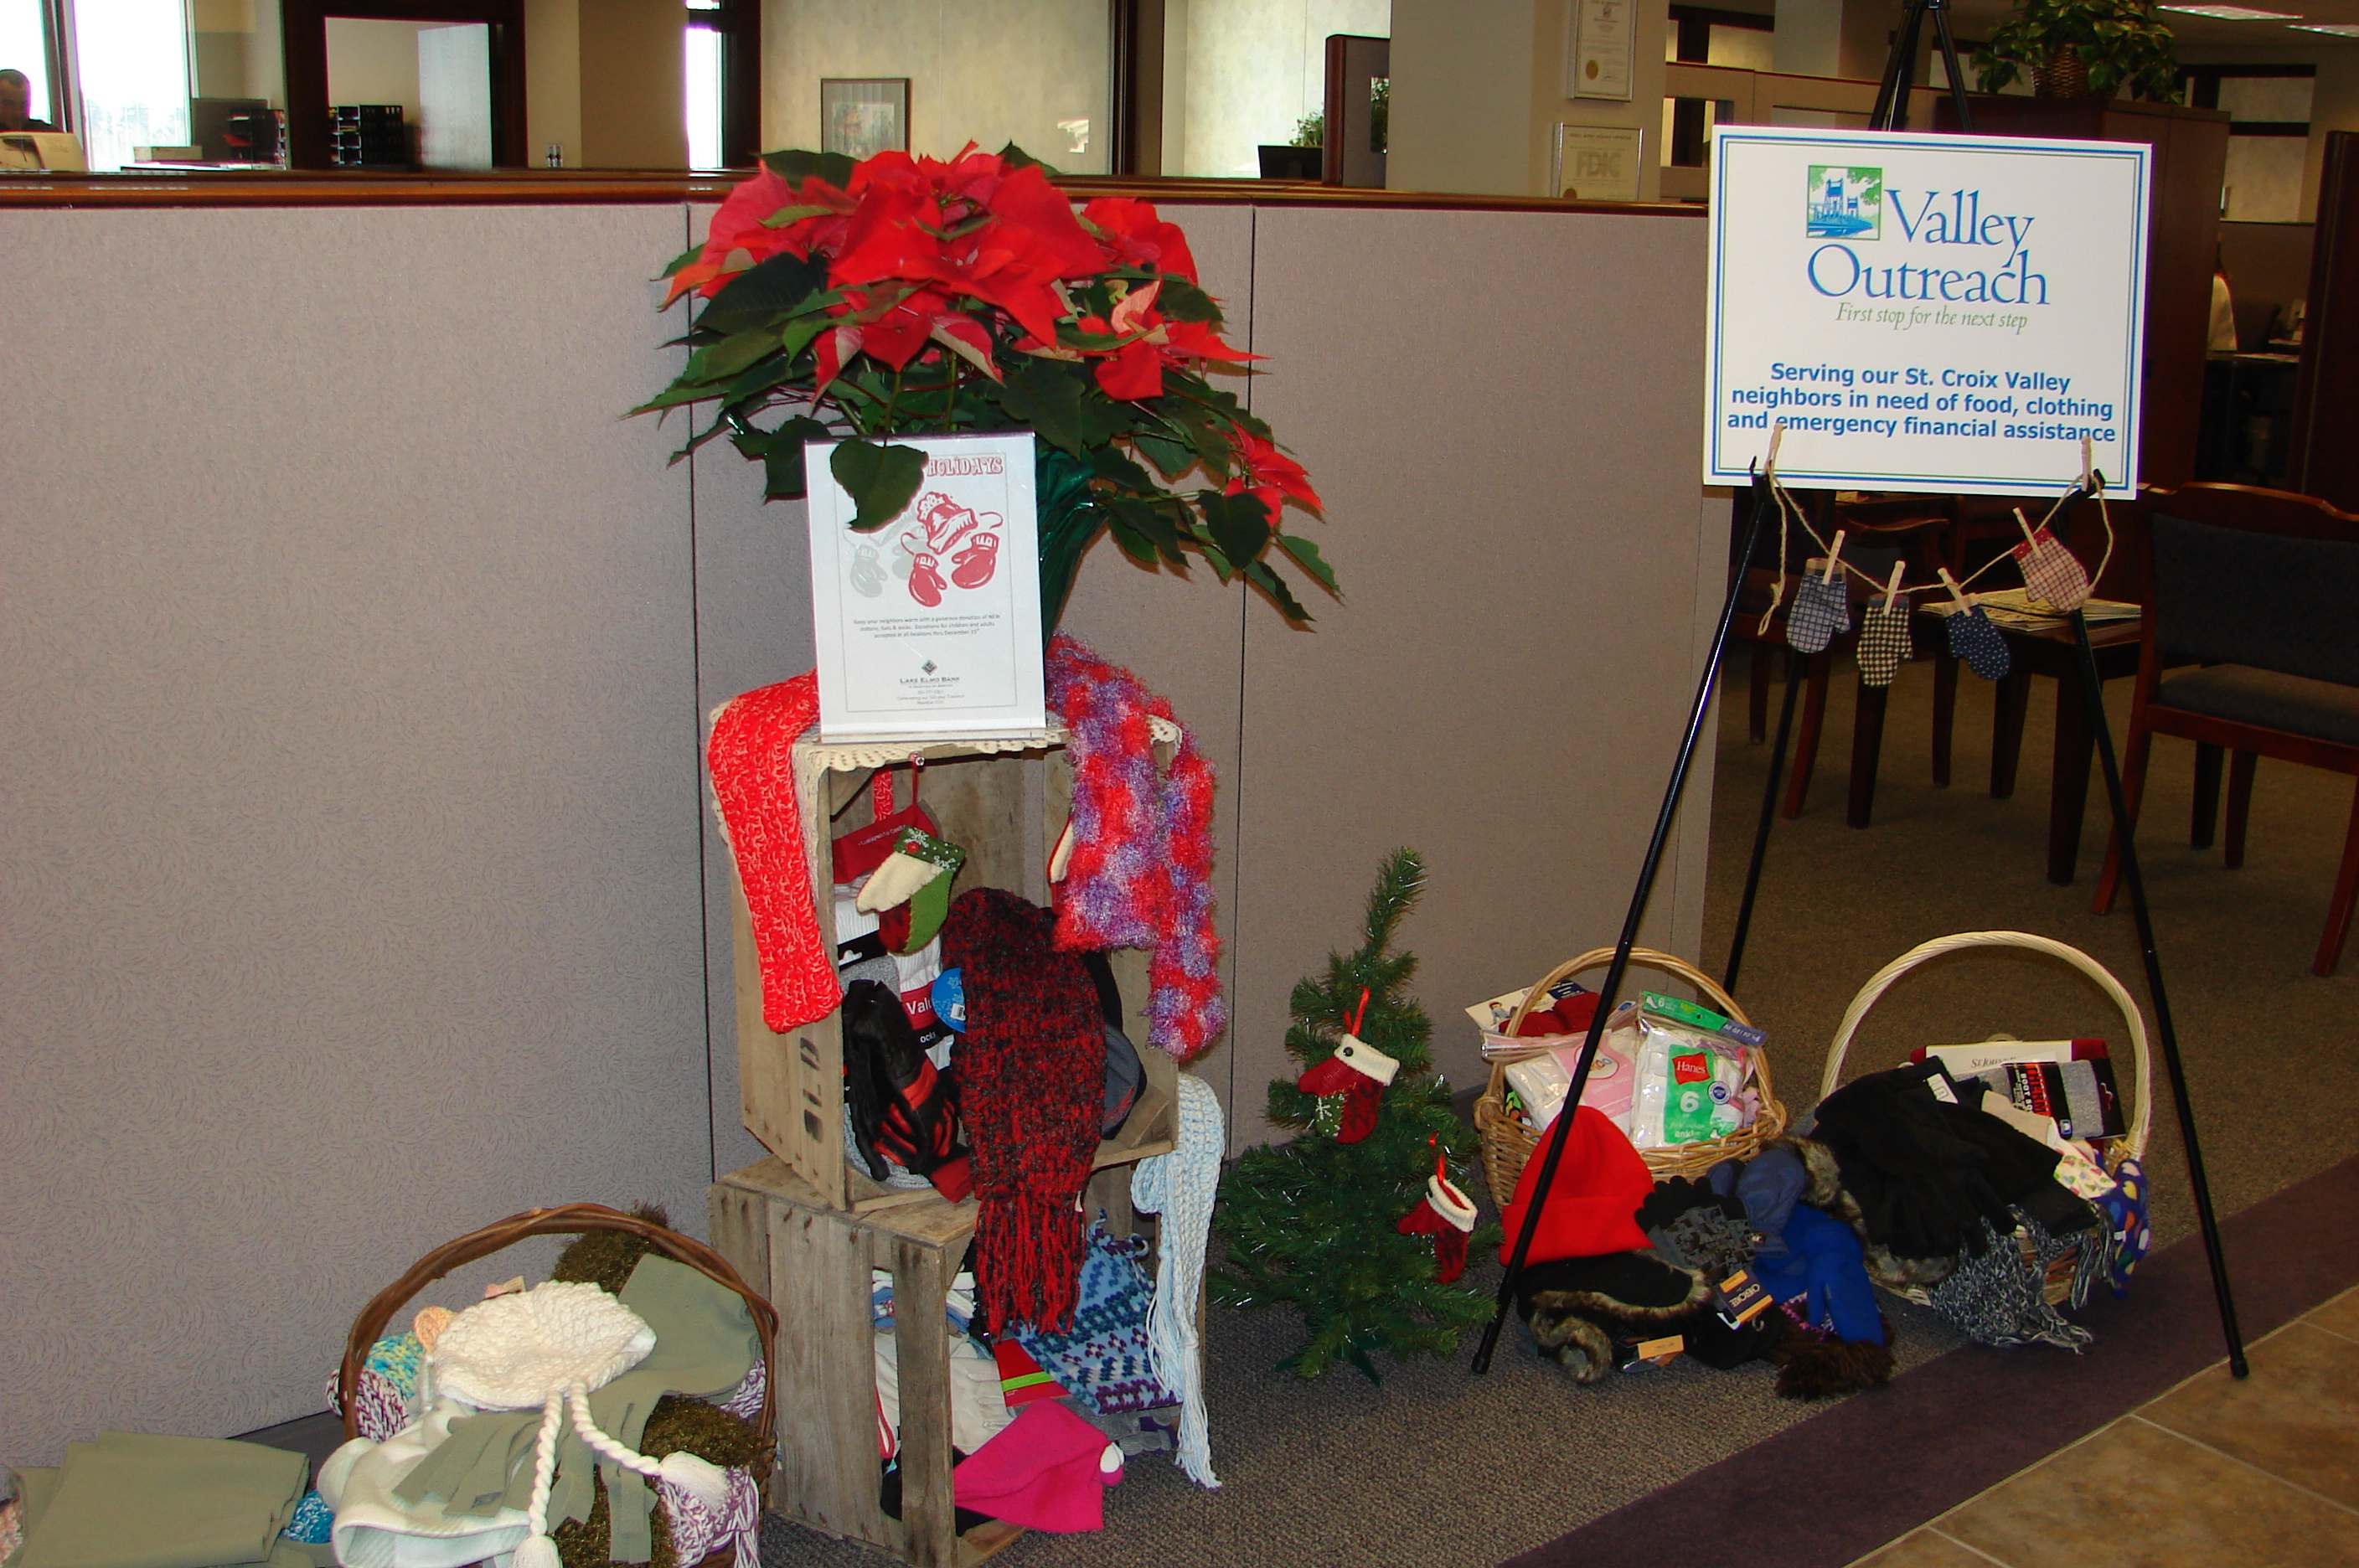 Image of the collection of mittens and hats for Valley Outreach